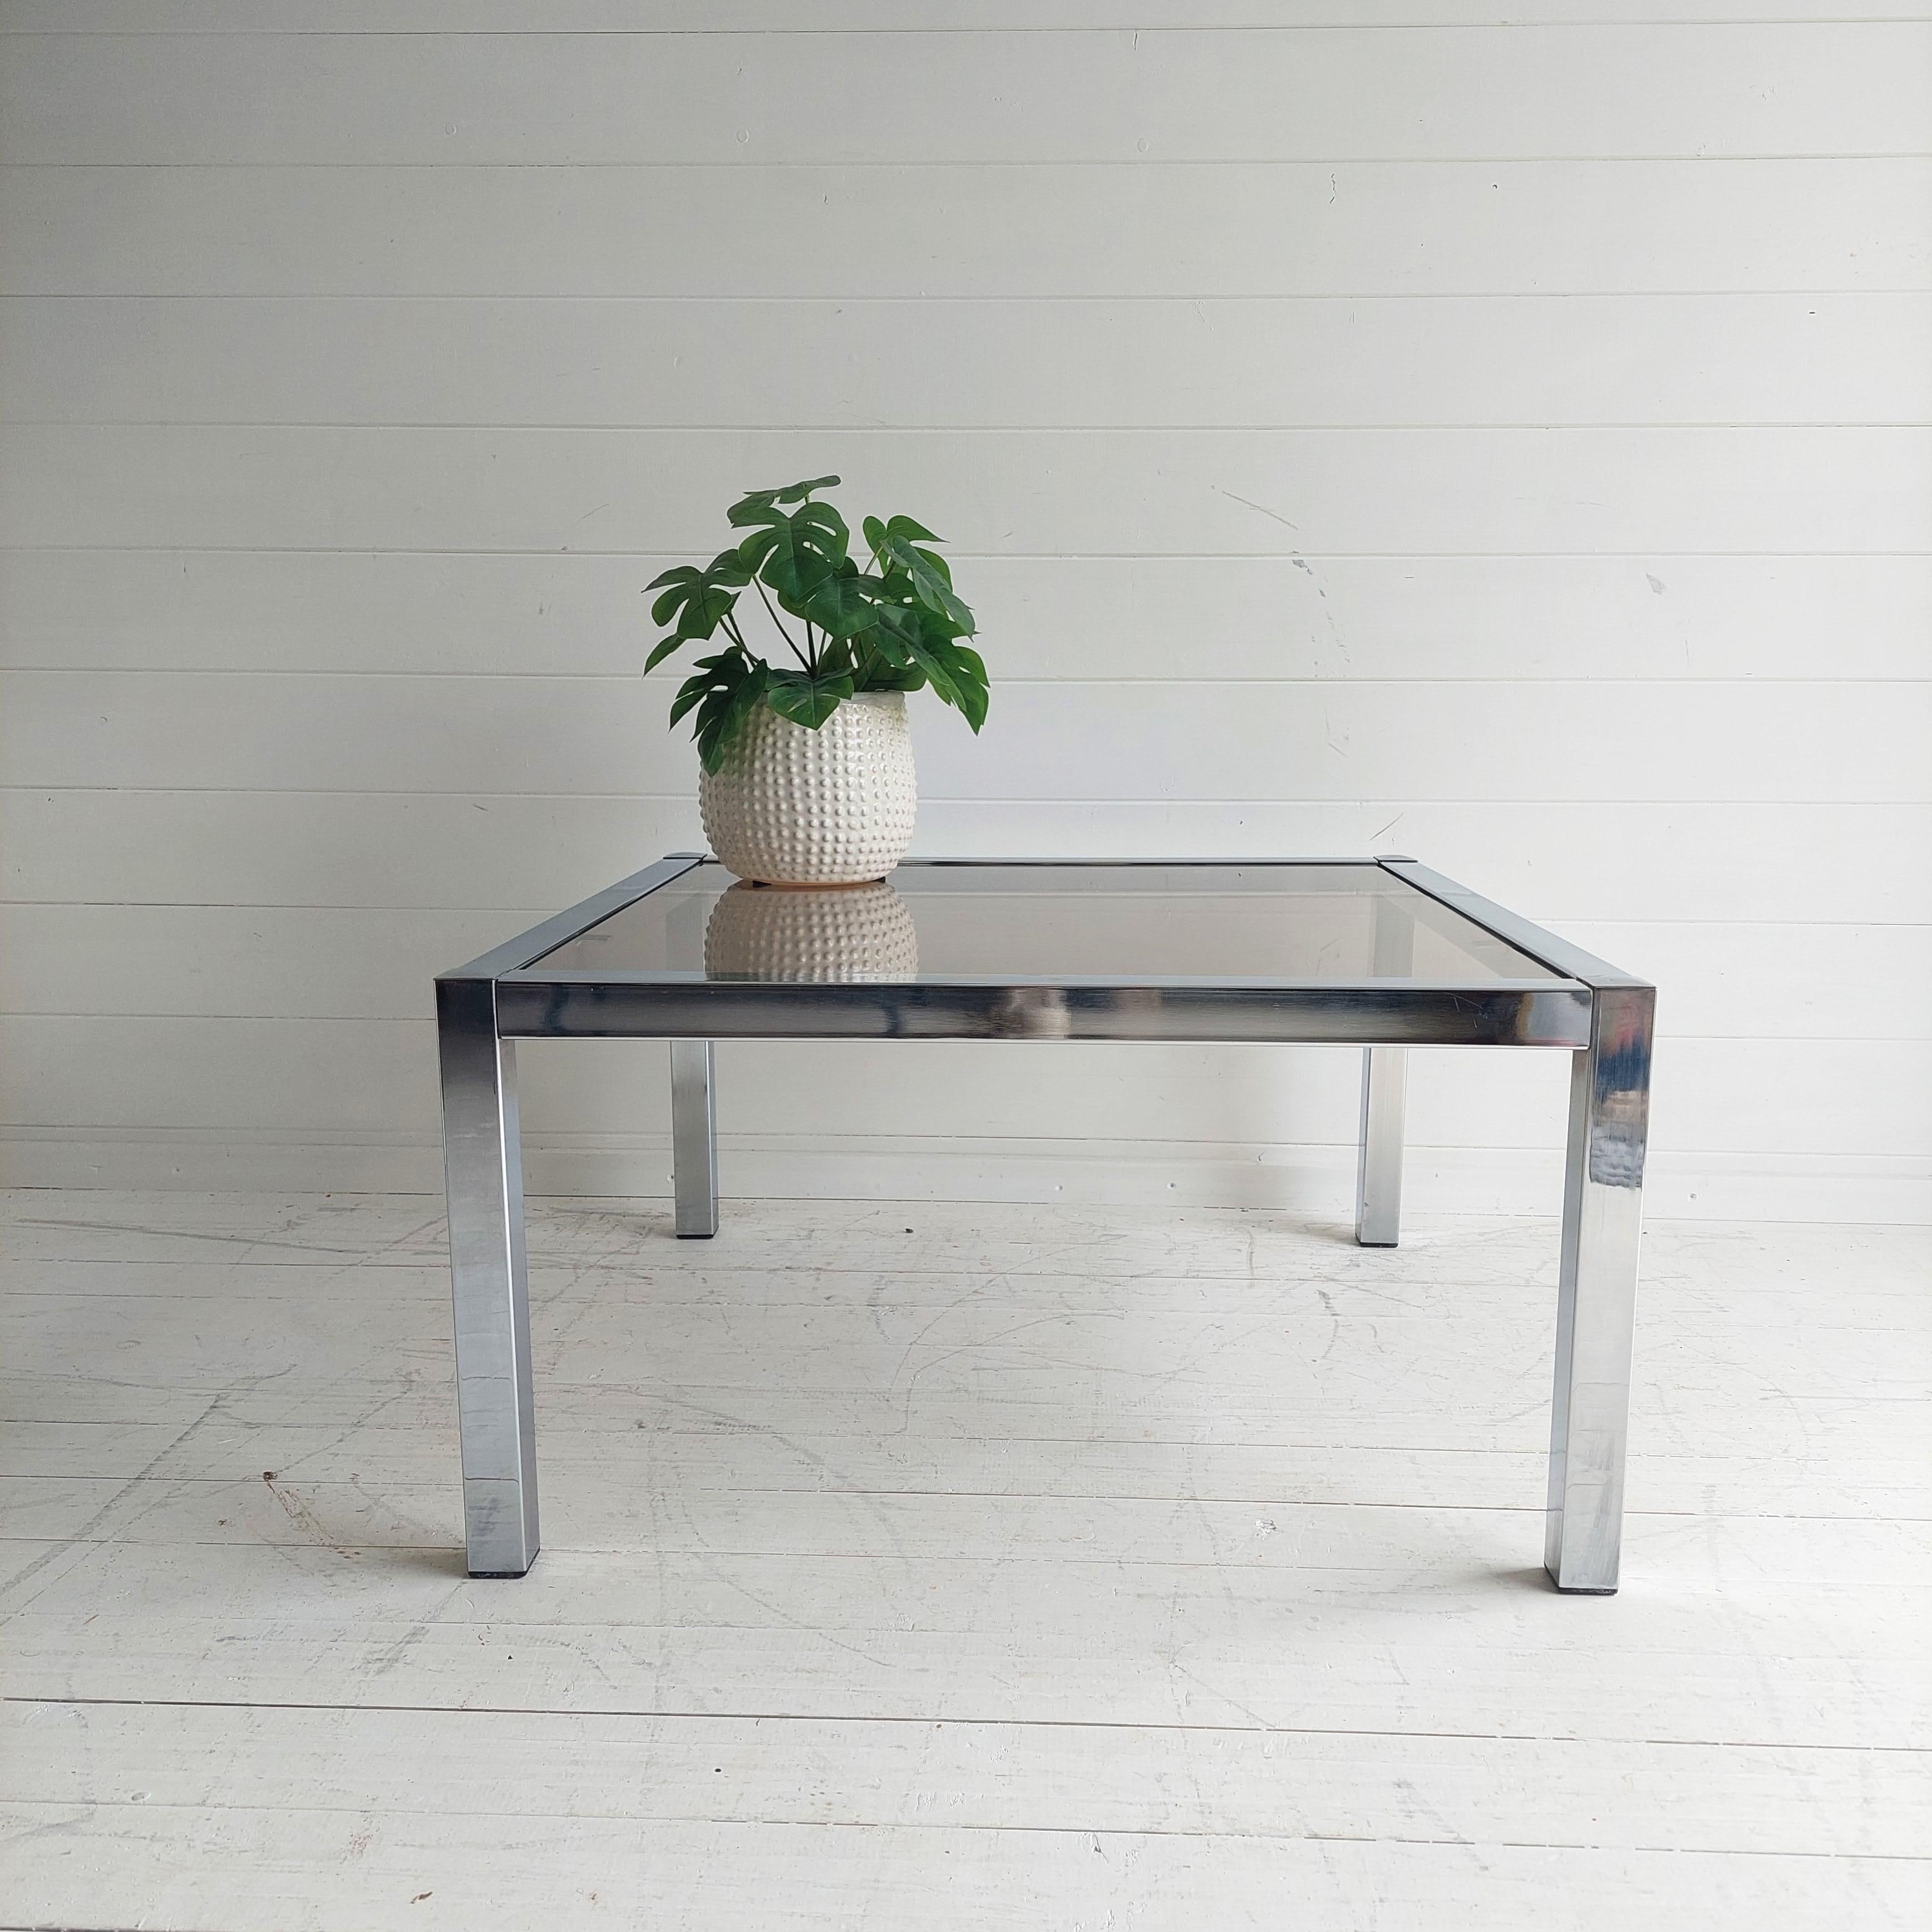 A stunning mid-century Pieff Styled coffee table in smoked glass and chrome.

A useful and decorative square coffee table of classic design
With a minimal and simple lines that will match any styled home.
Square frame and square legs with